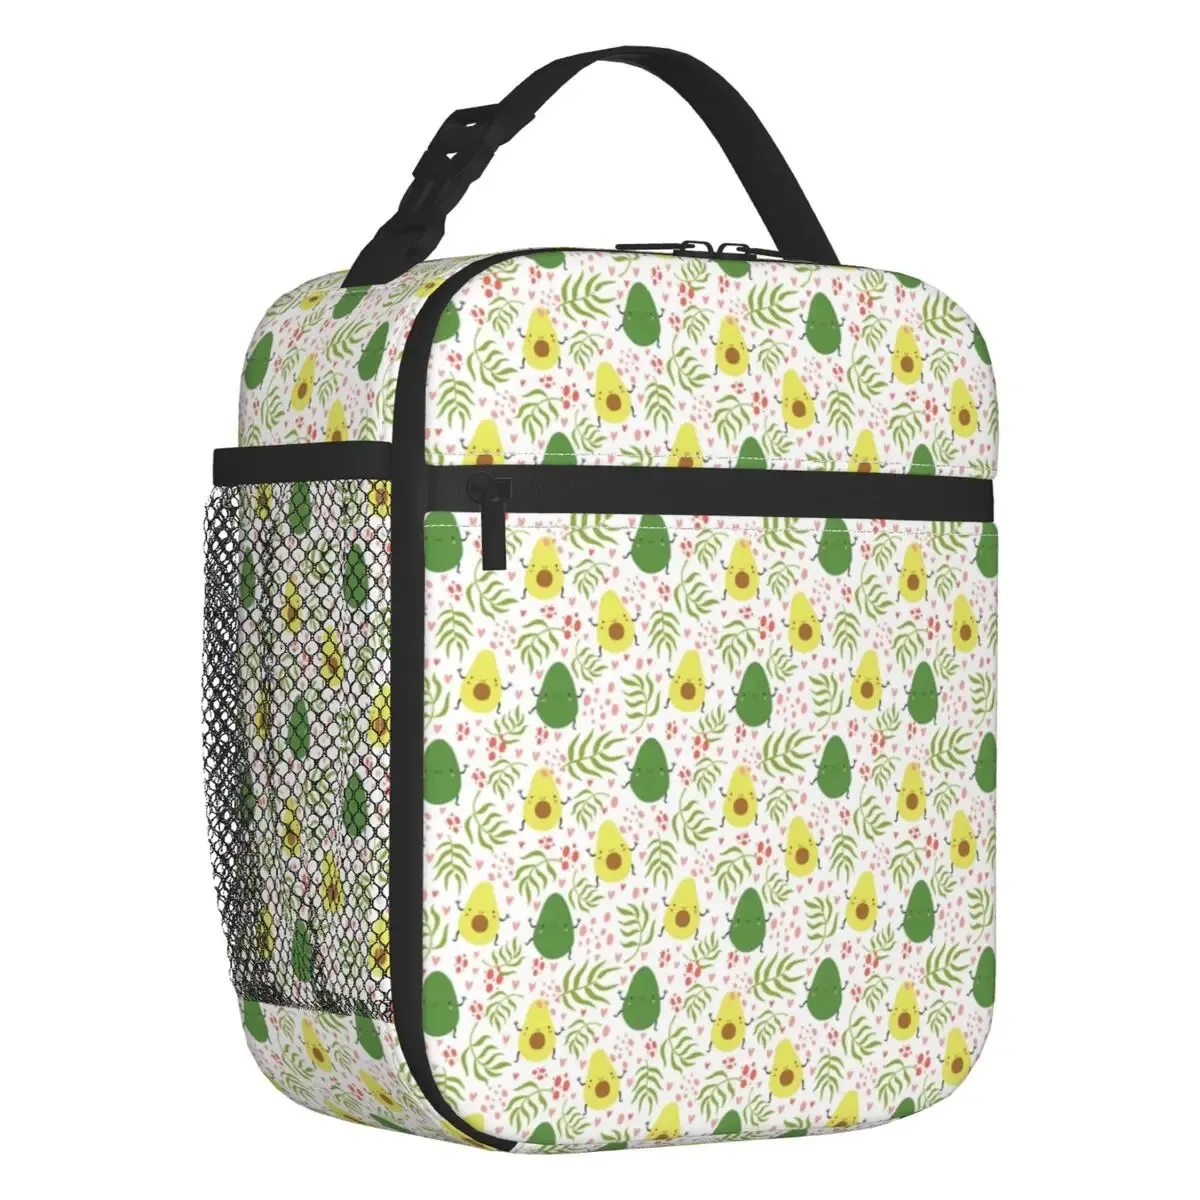 Cute Green Avocado Pattern Insulated Lunch Bag for Women Leakproof Thermal Cooler Lunch Tote Beach Camping Travel 240106